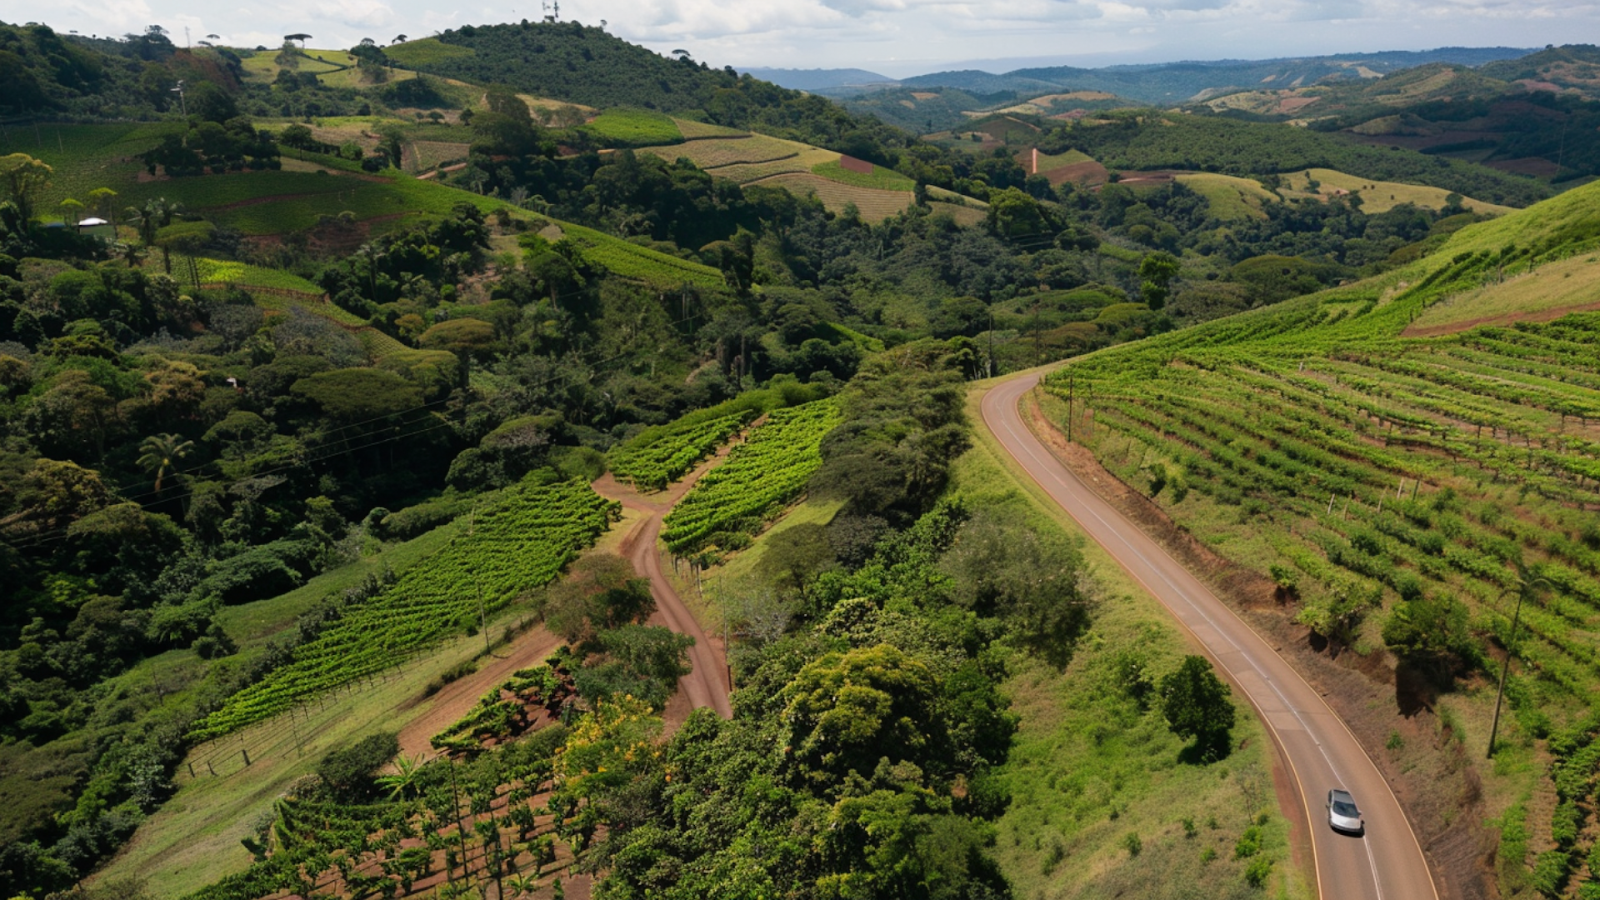 A scenic driving route amidst the vineyards near Sao Paulo